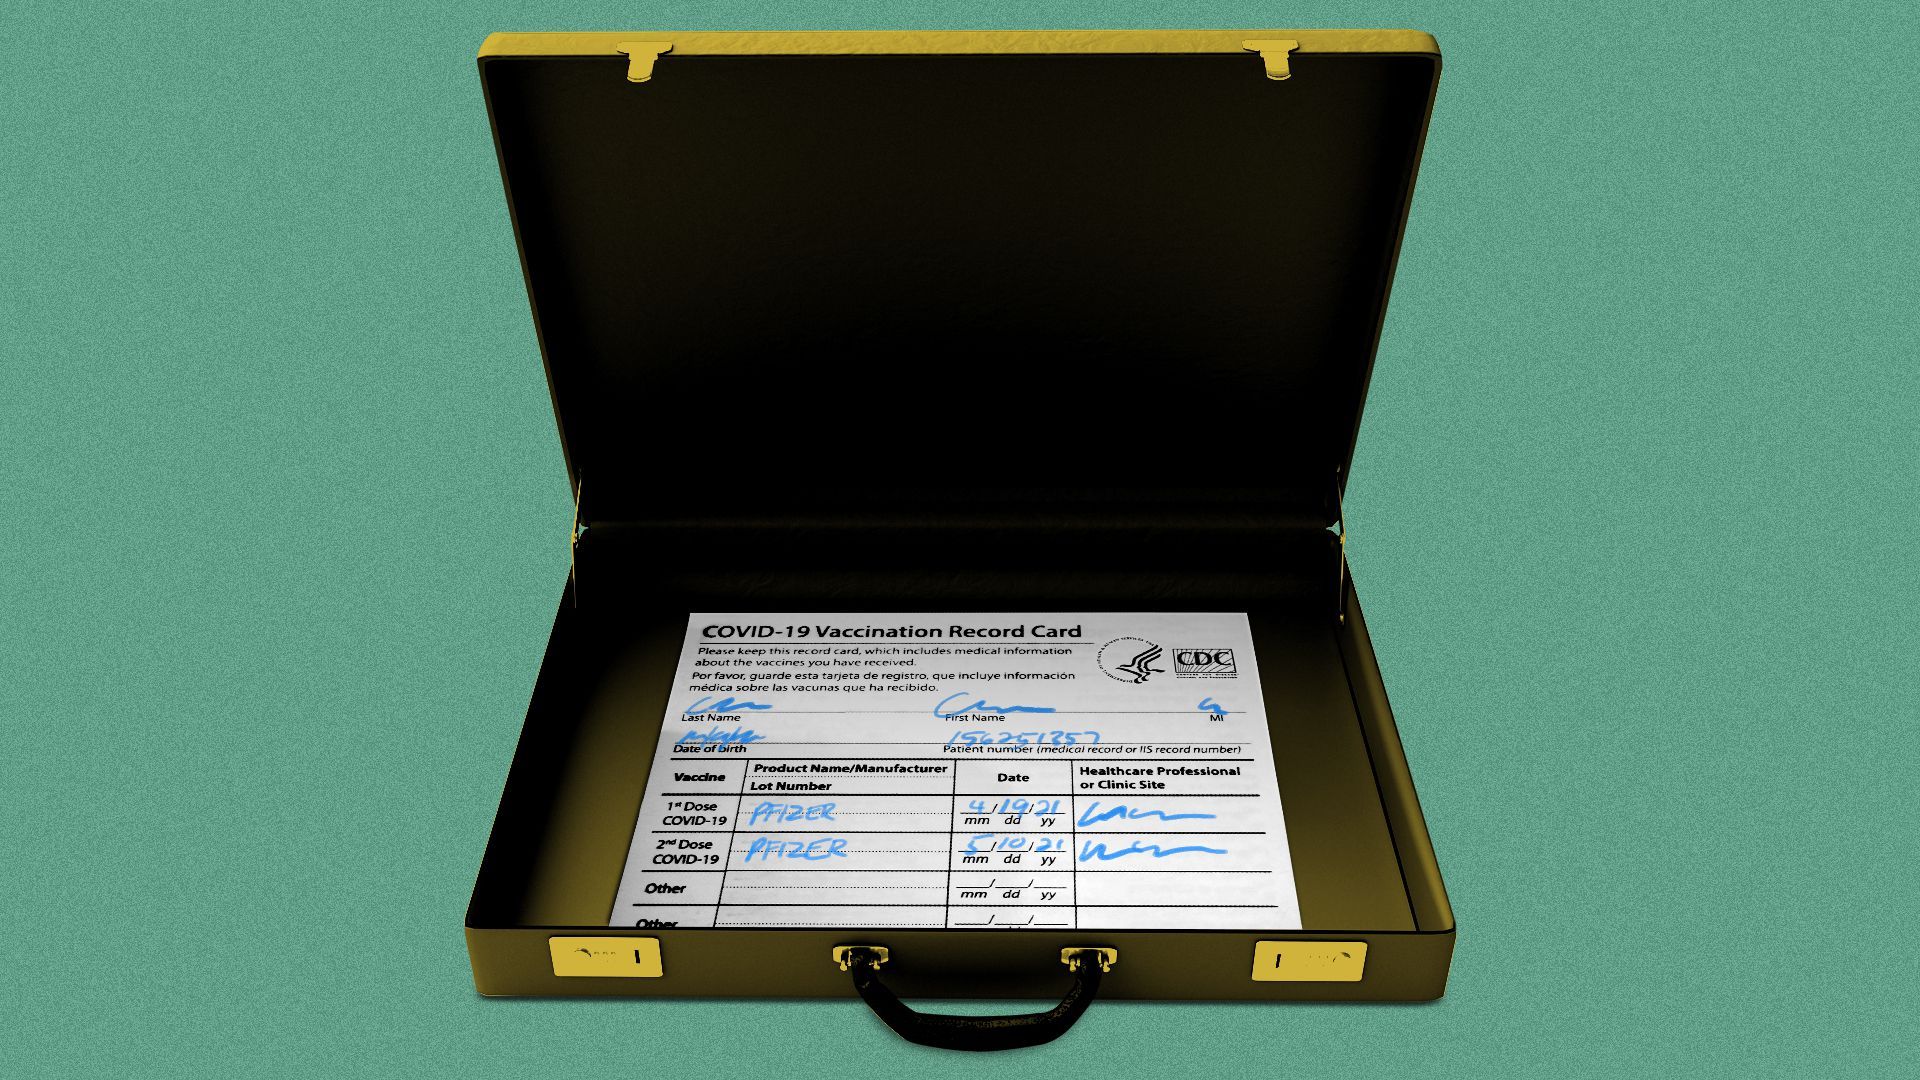 Illustration of a briefcase with a vaccination record card in it.